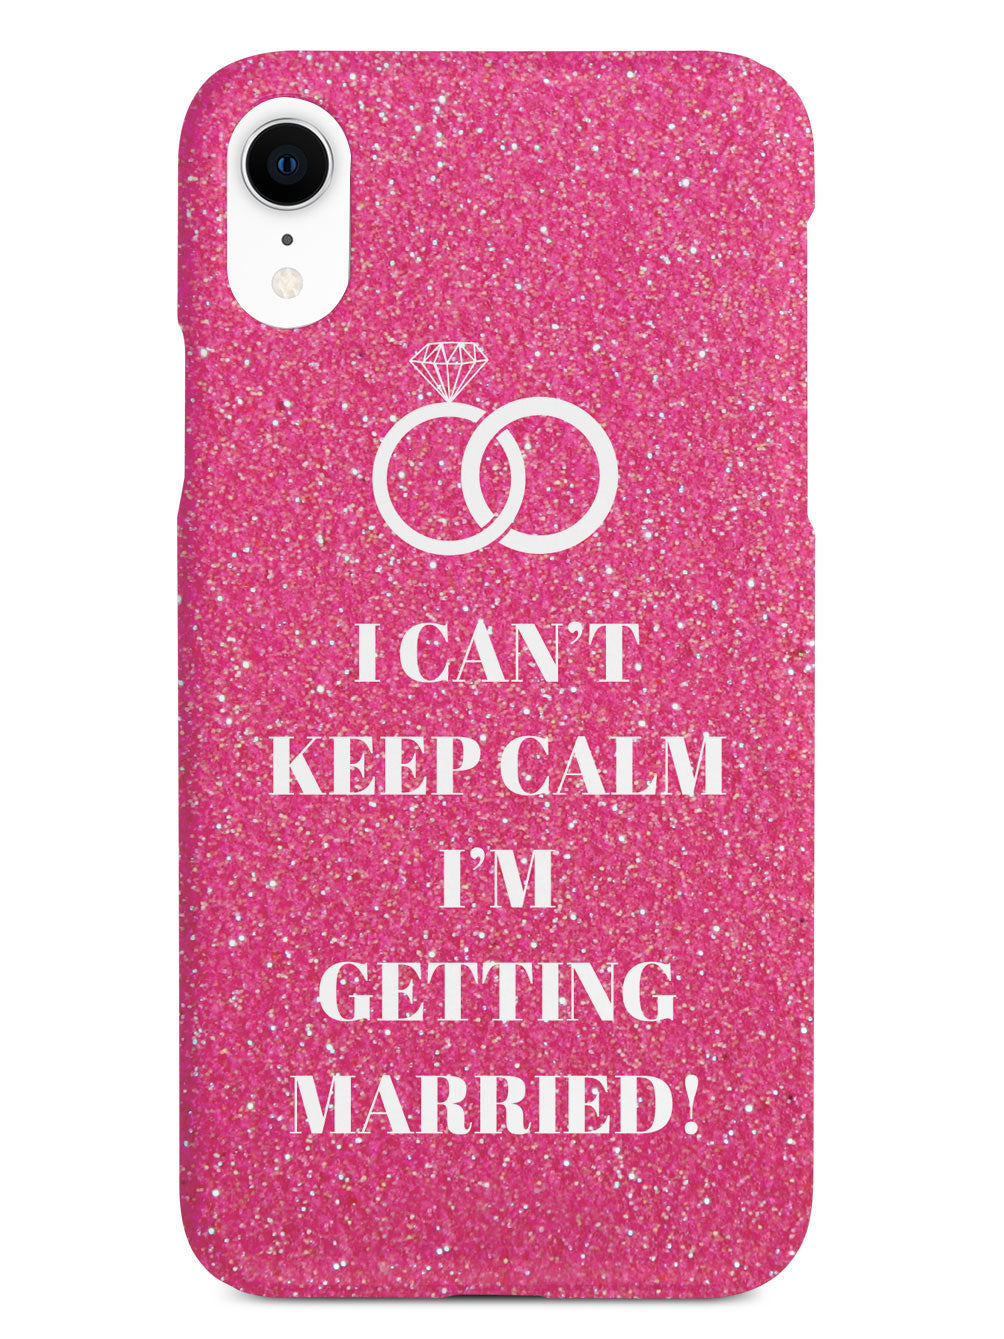 I Can't Keep Calm, I'm Getting Married! Case